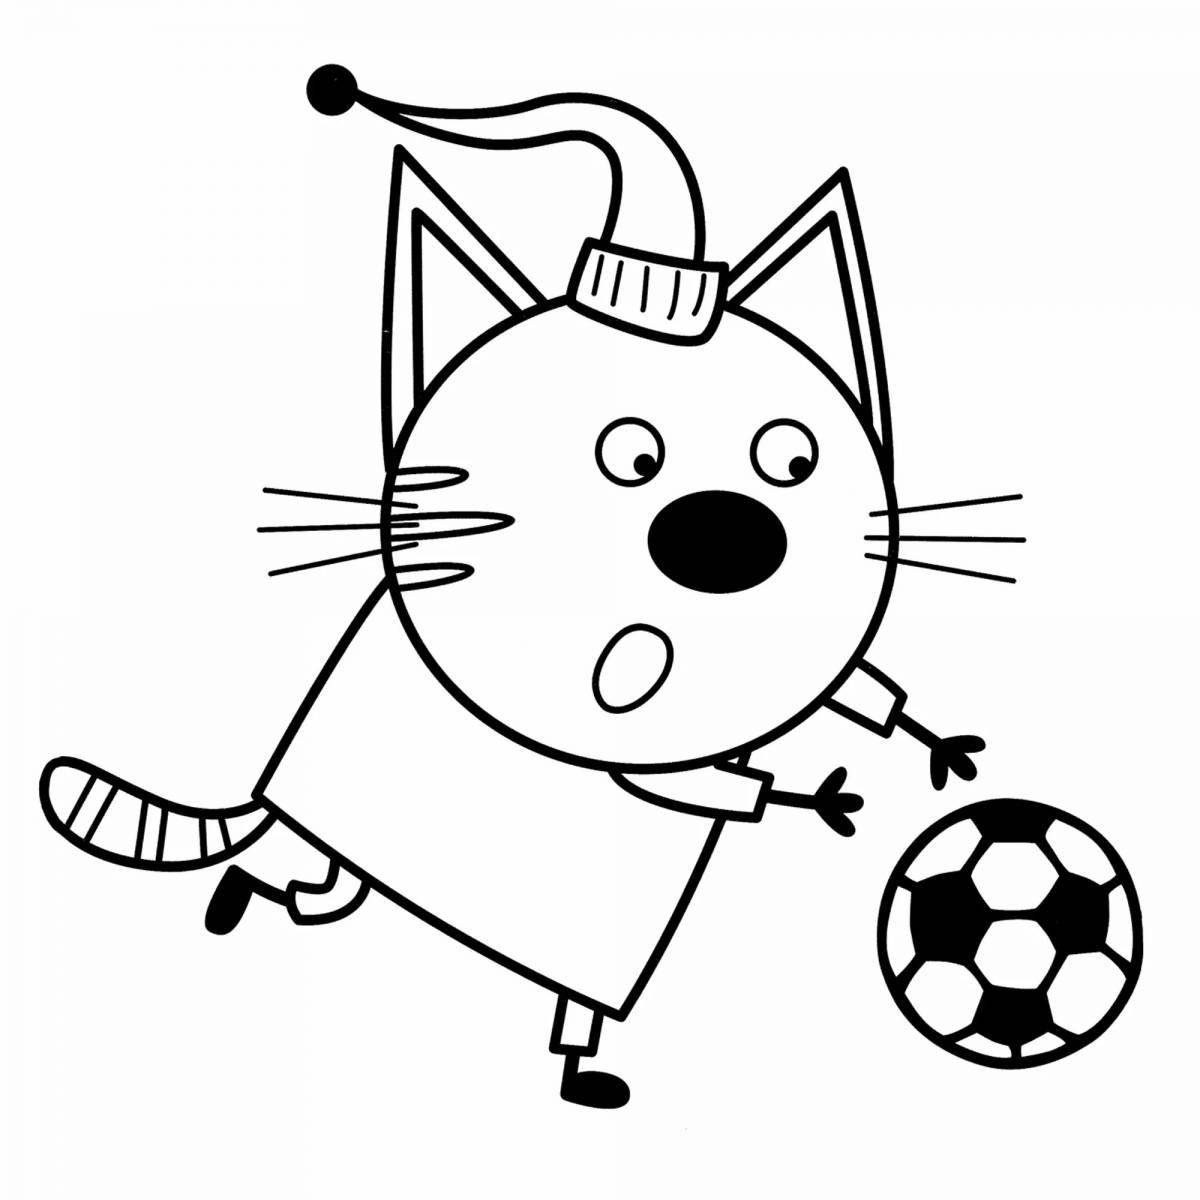 Gorgeous 3 cats coloring pages for girls